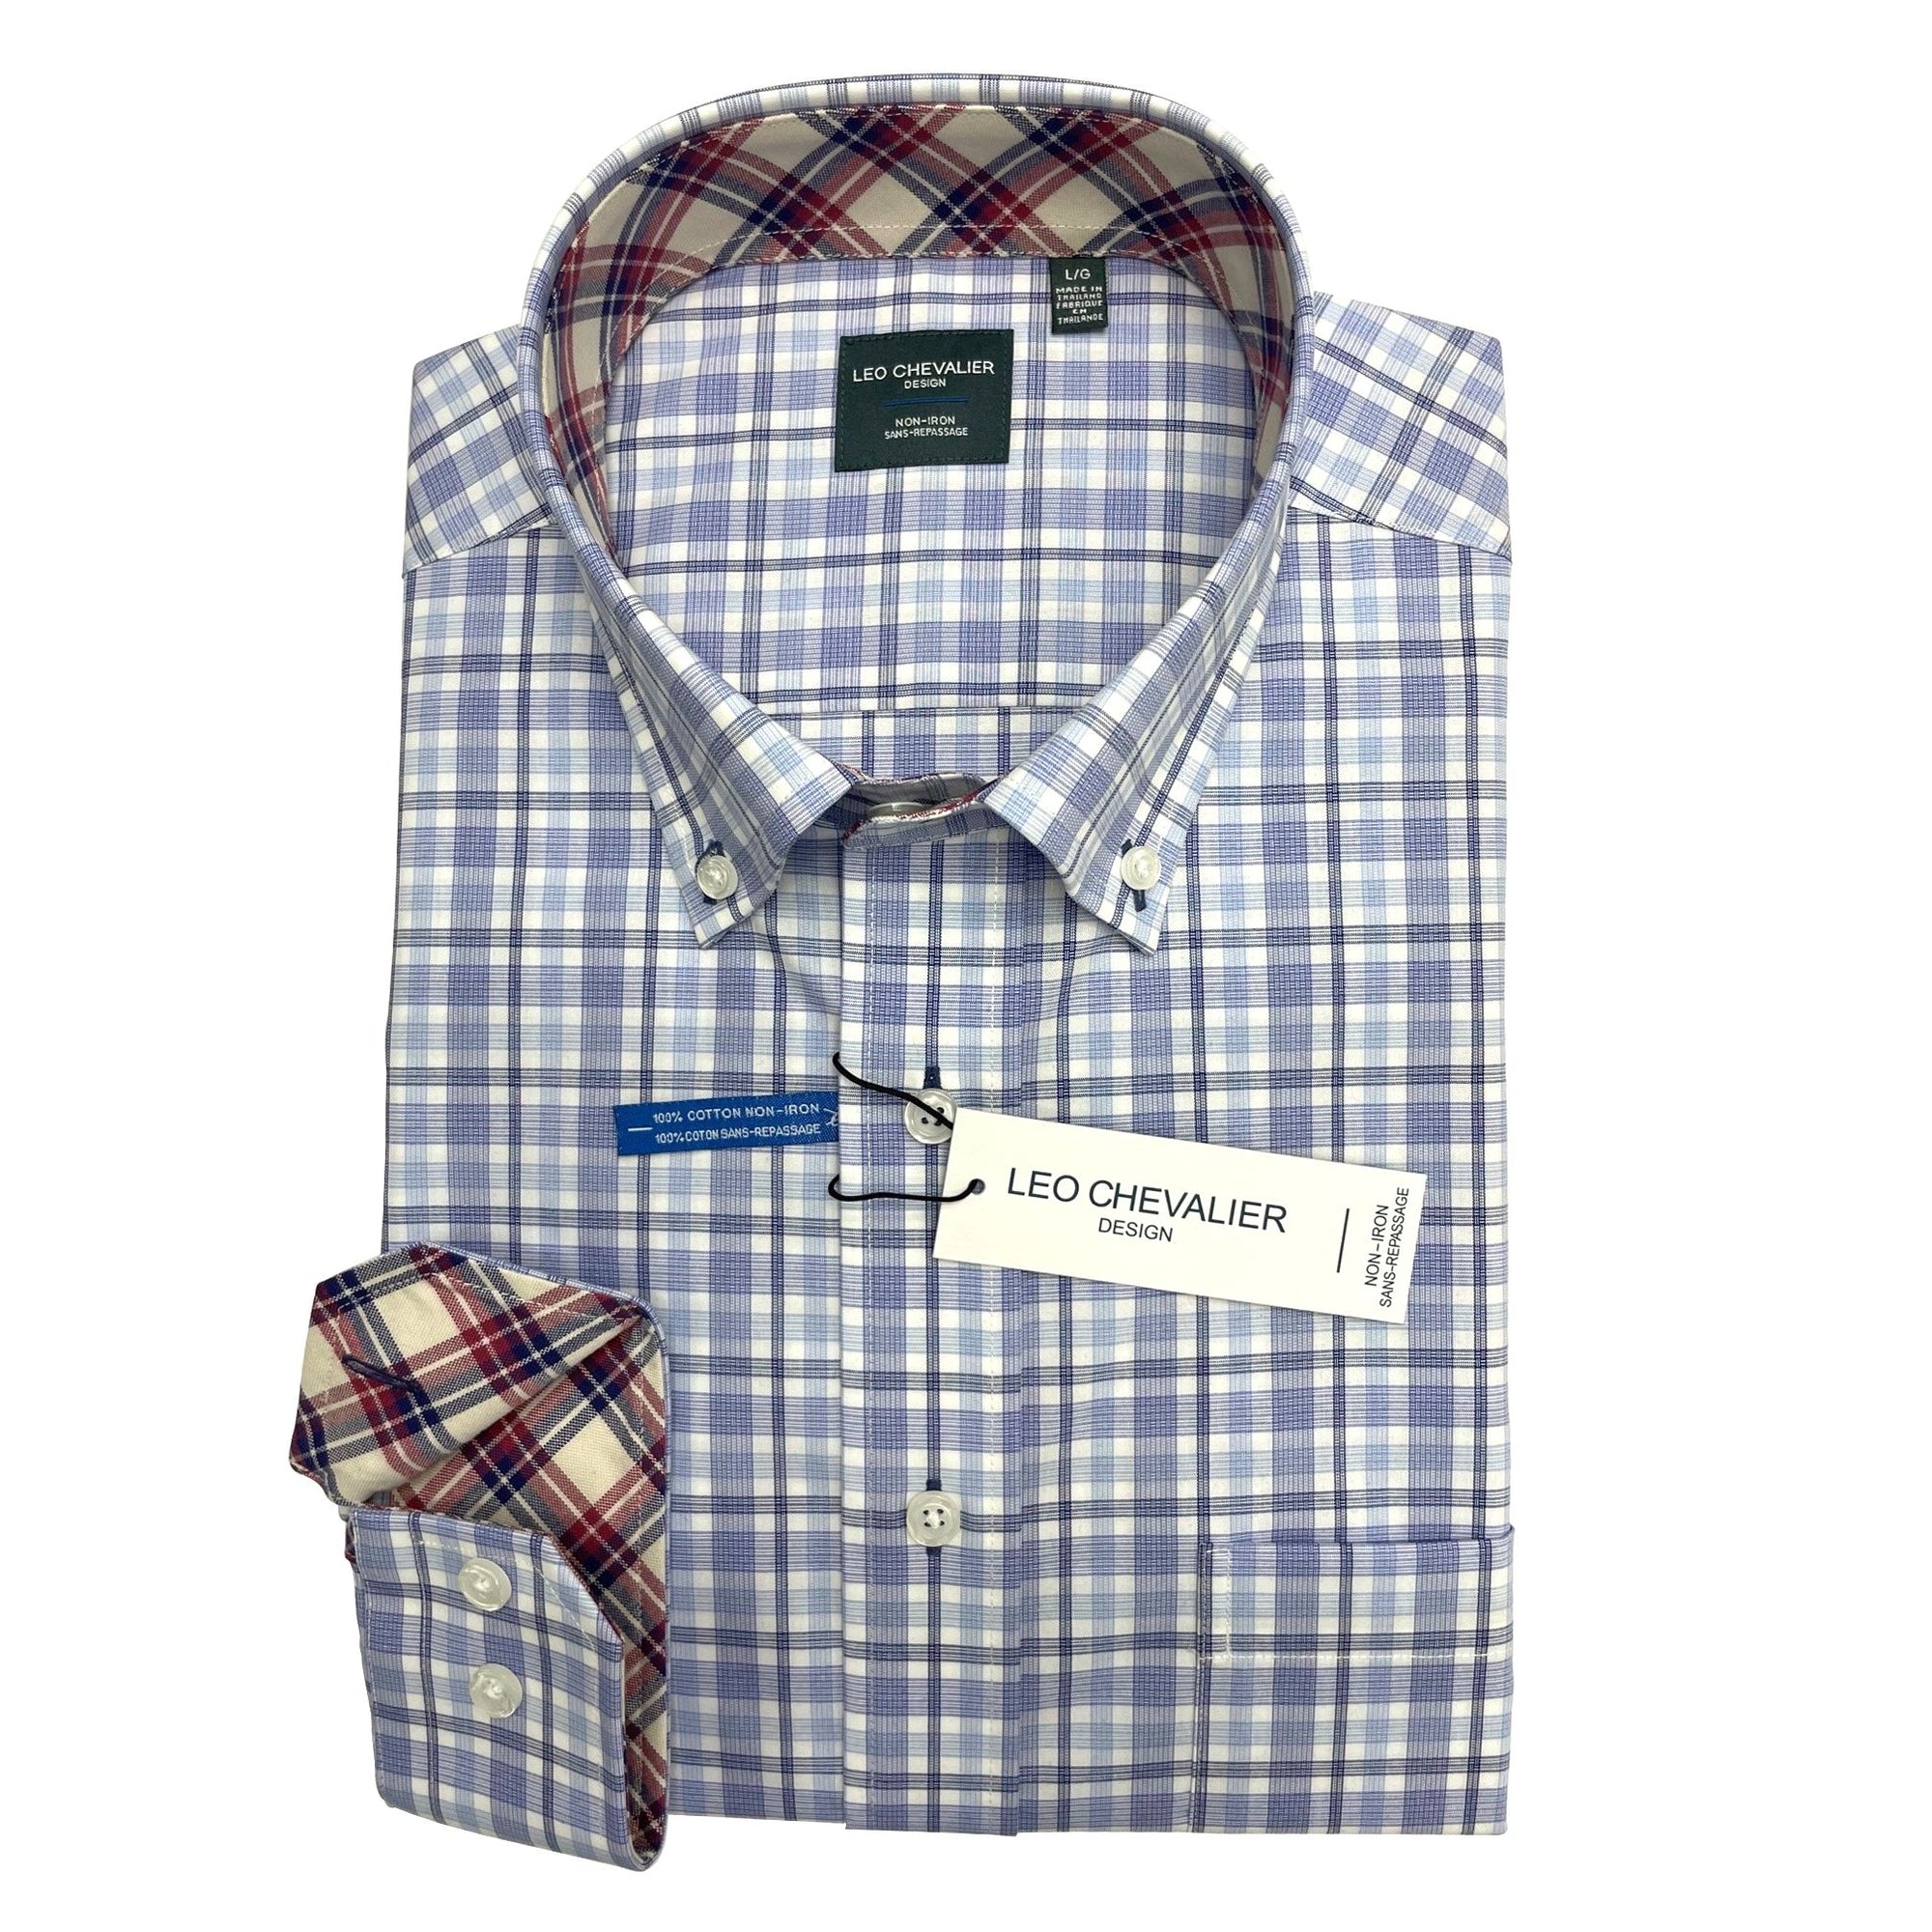 Multi Blue and White Plaid No-Iron Cotton Sport Shirt with Button Down Collar by Leo Chevalier